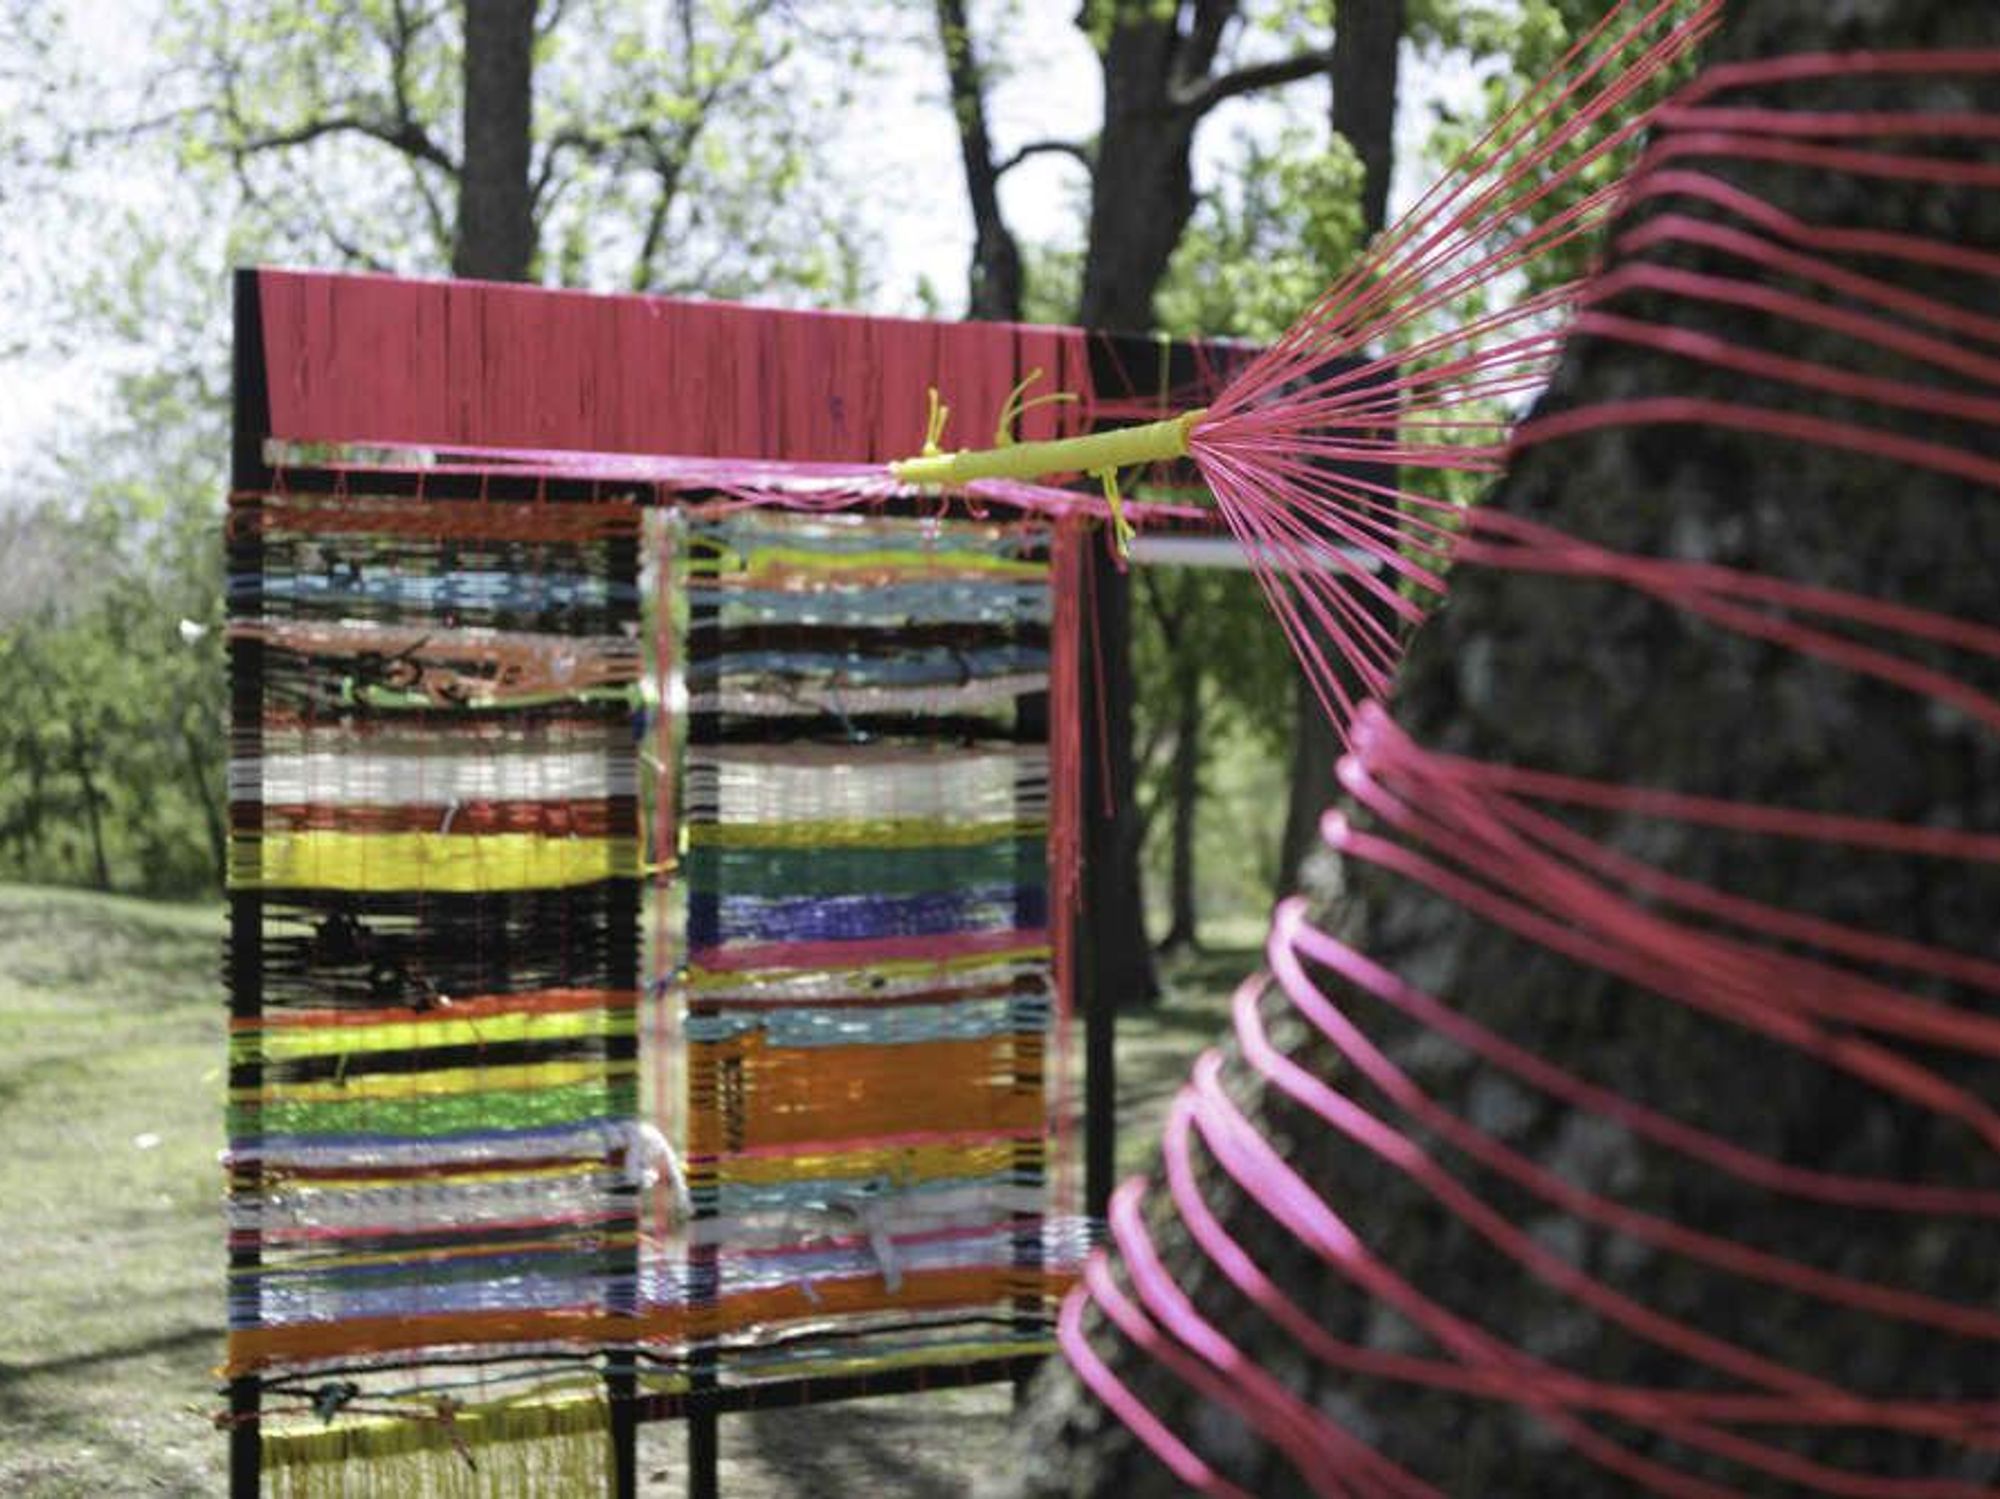 Mire + Mend, a community art project weaves colorful fabric and ropes between trees outside the Elisabet Ney Museum.